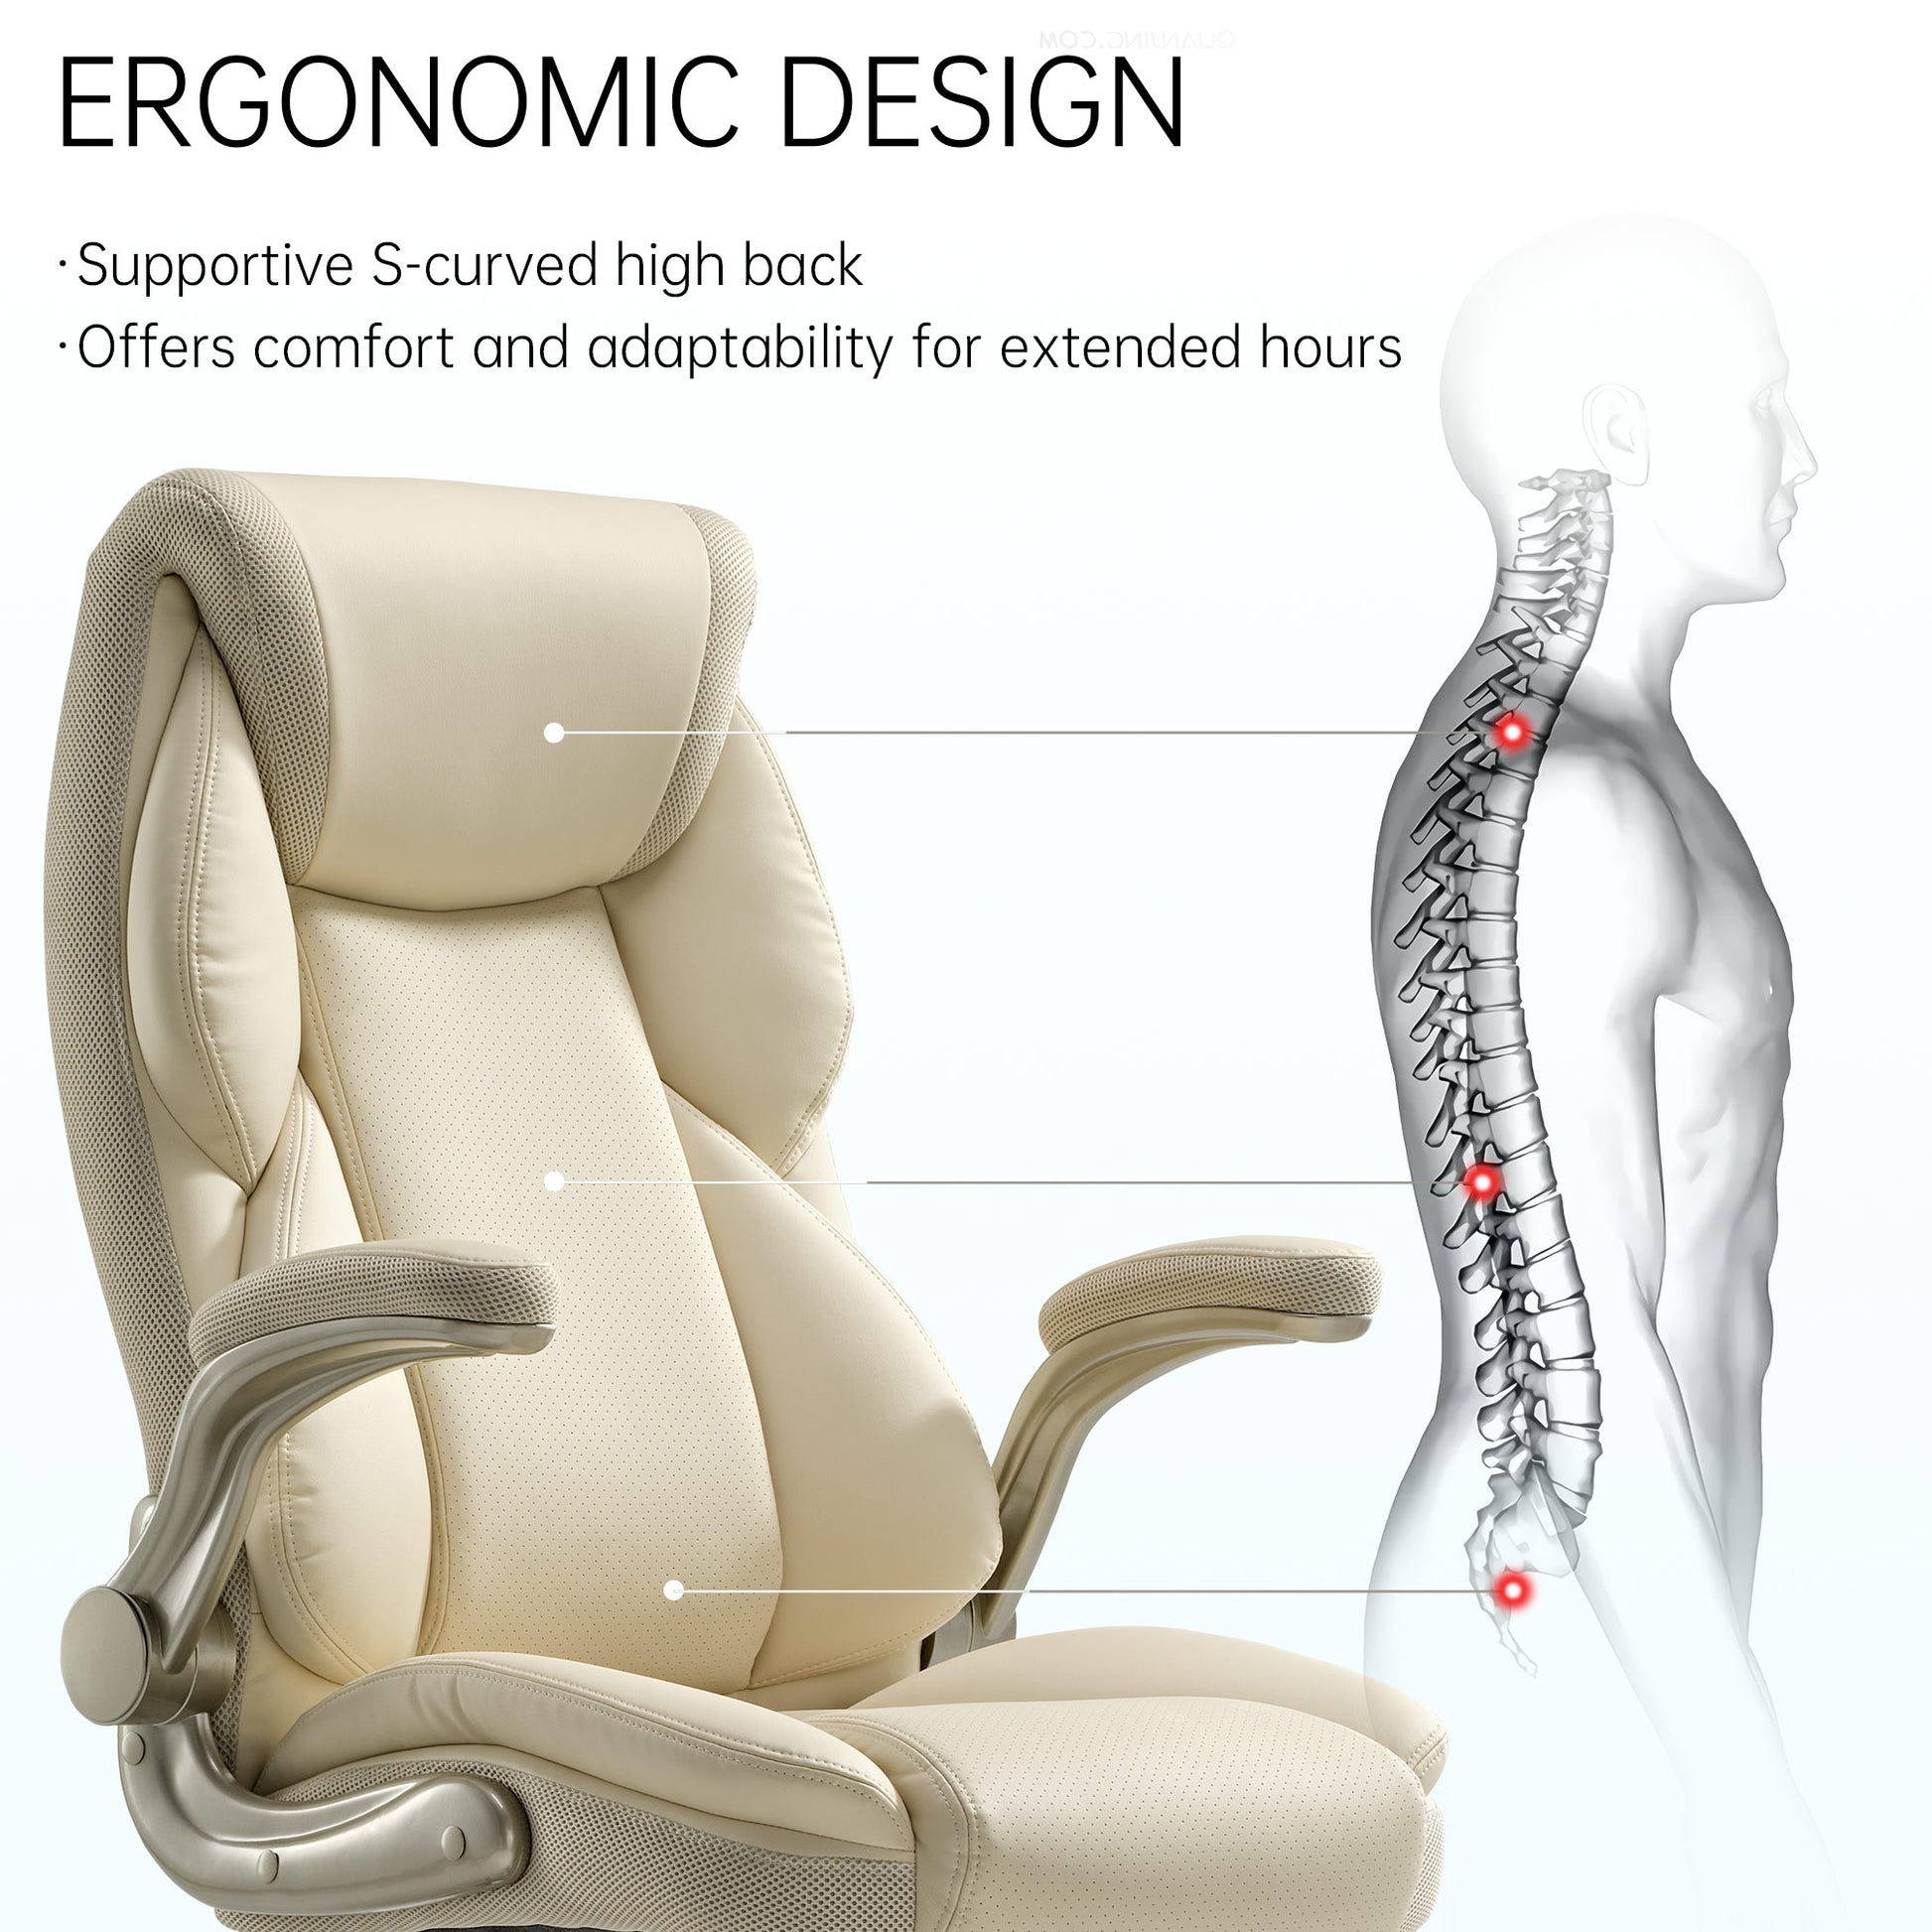 Galene, Home Office Chair, Off-White, Ergonomic Design Supportive S-curved high back, offers comfort and adaptability for extended hours